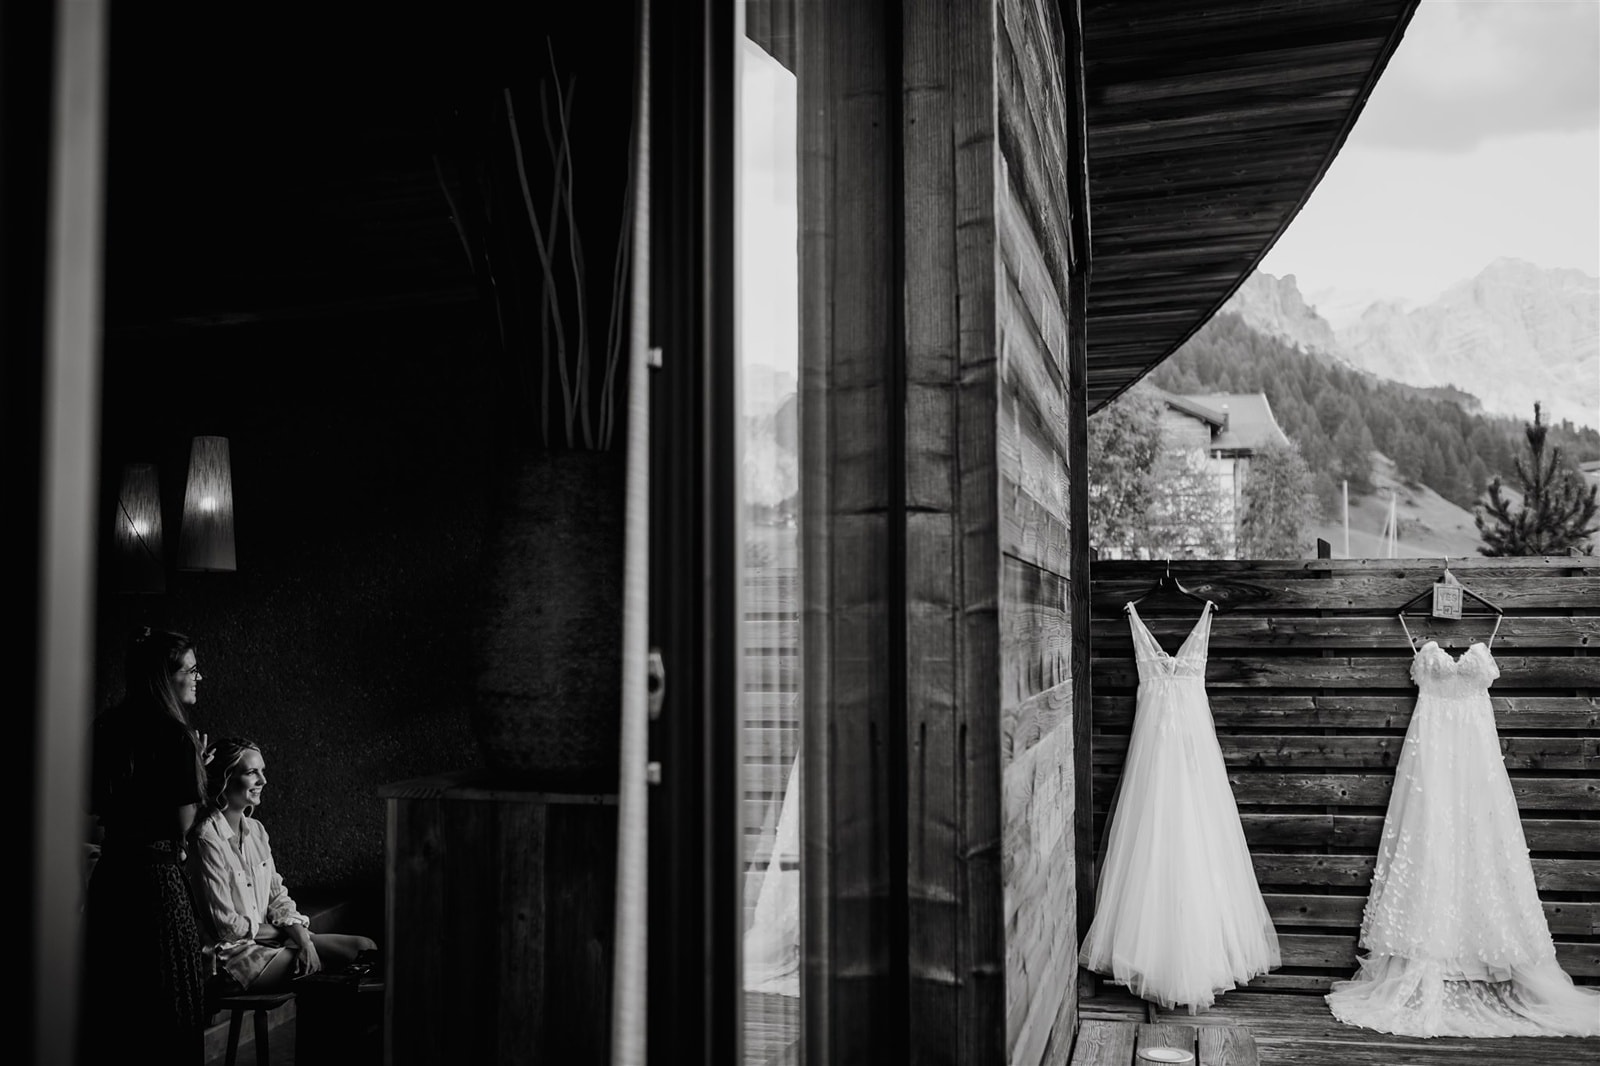 Two wedding dresses hang on a wooden fence with the Dolomites mountains in the distance behind them